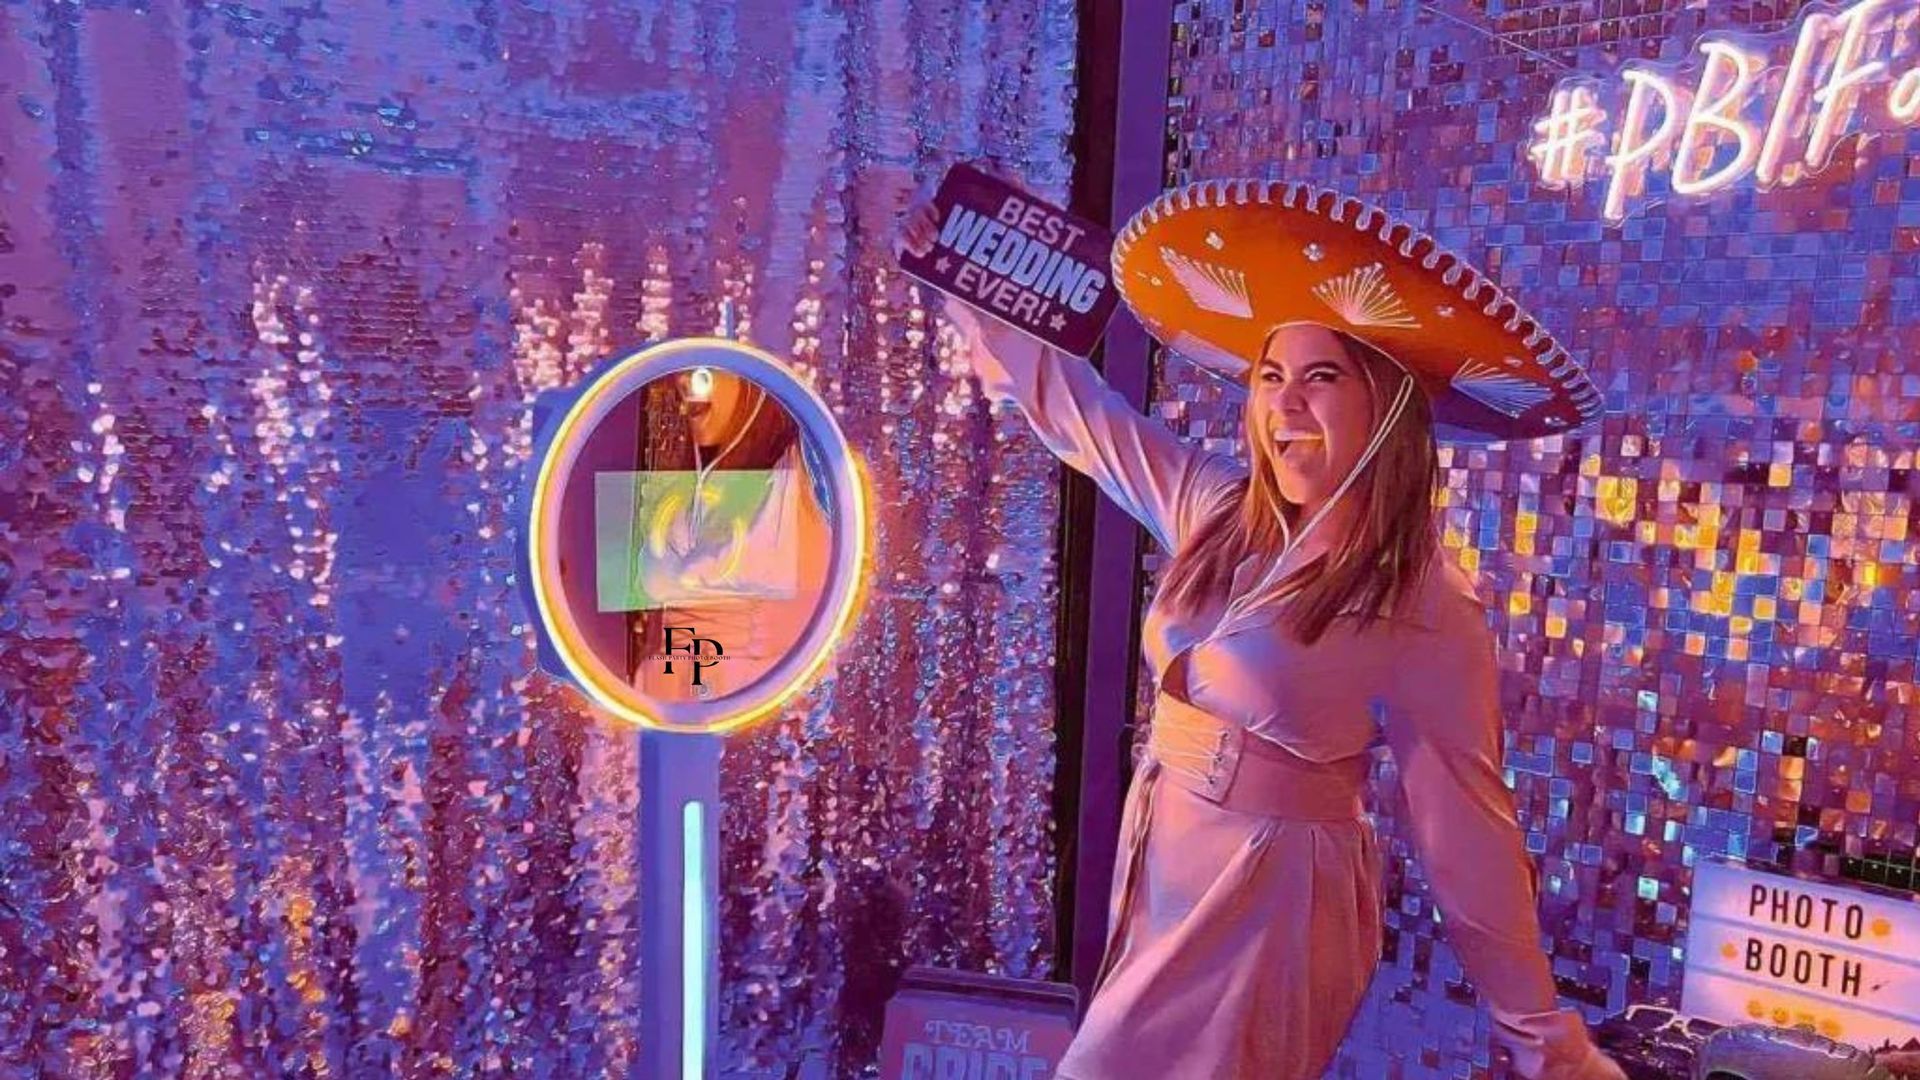 A woman wearing a sombrero and holding a sign, posing for photos in the Cloee Photo Booth.